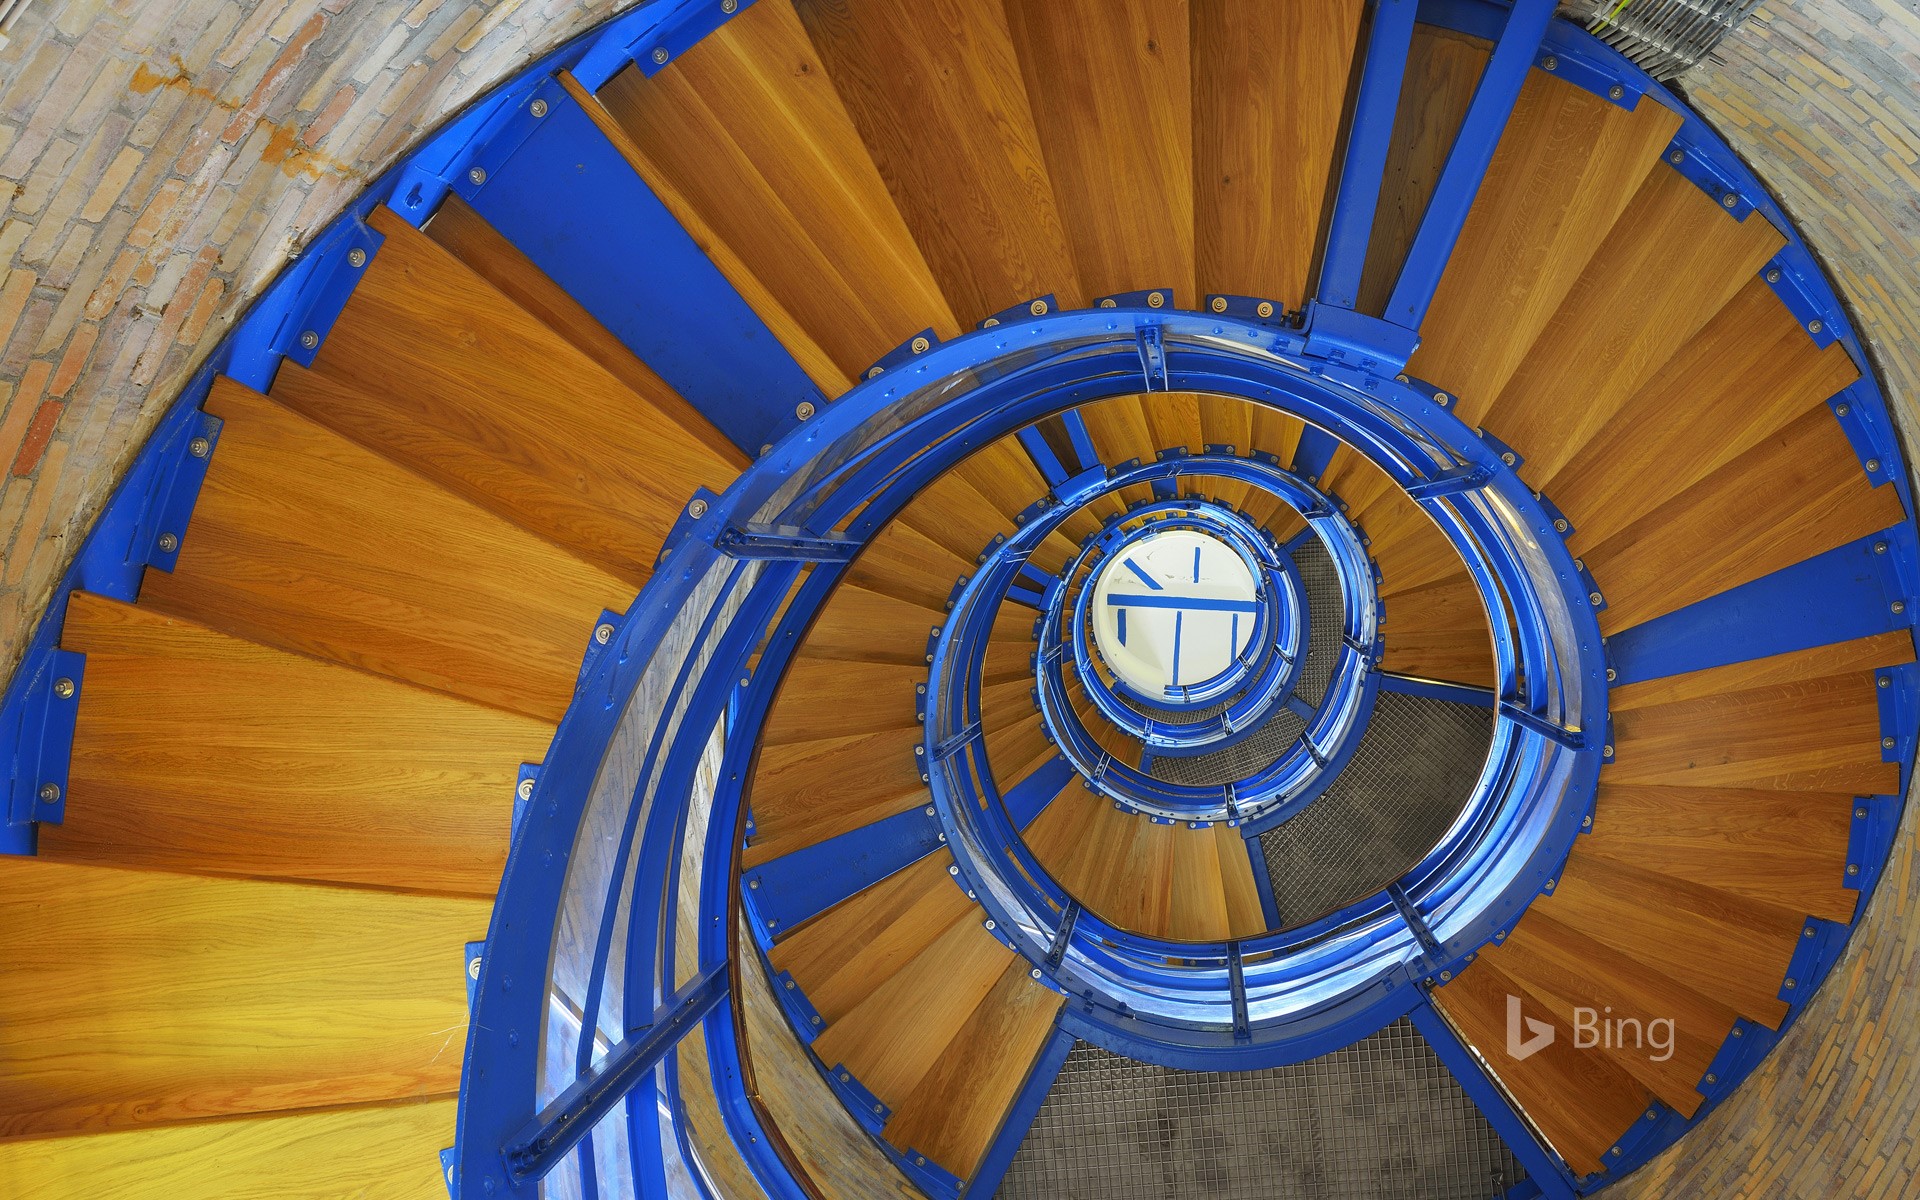 Spiral staircase in the Flügge lighthouse on the island of Fehmarn, Schleswig-Holstein, Germany